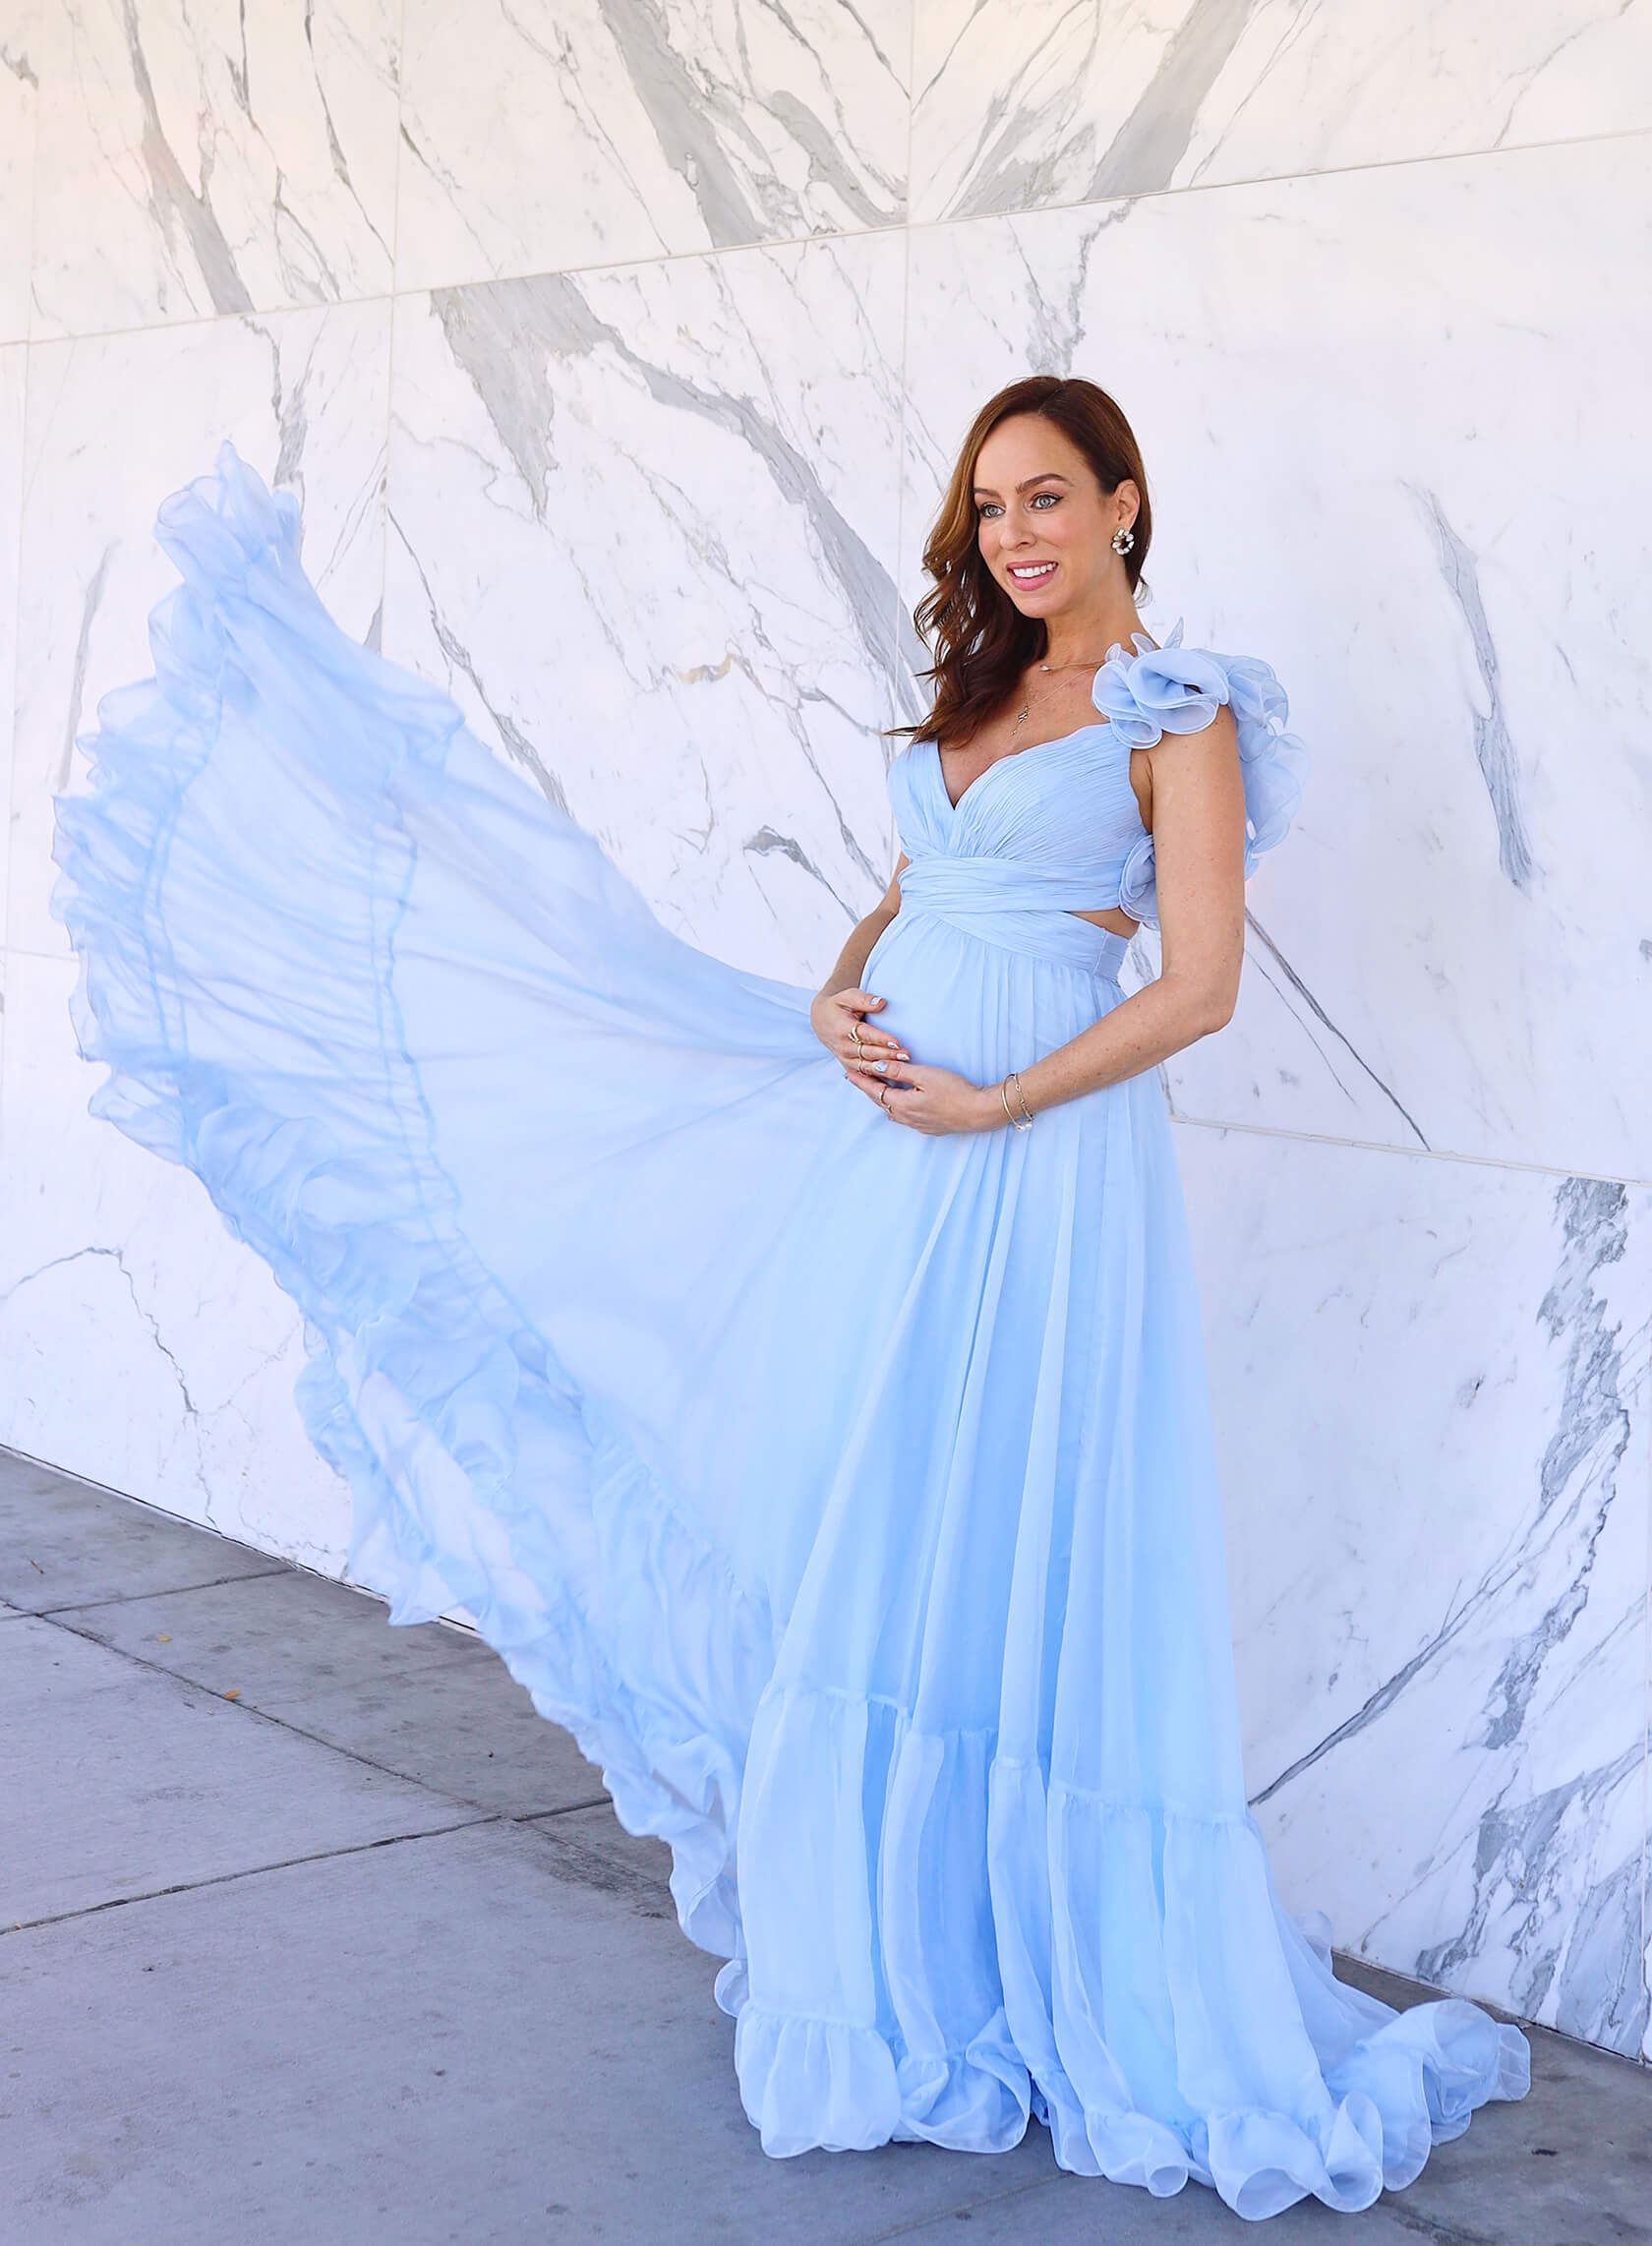 Sydne-Style-shows-what-to-wear-for-a-gender-reveal-in-Mac-Duggal-blue-dress.jpg